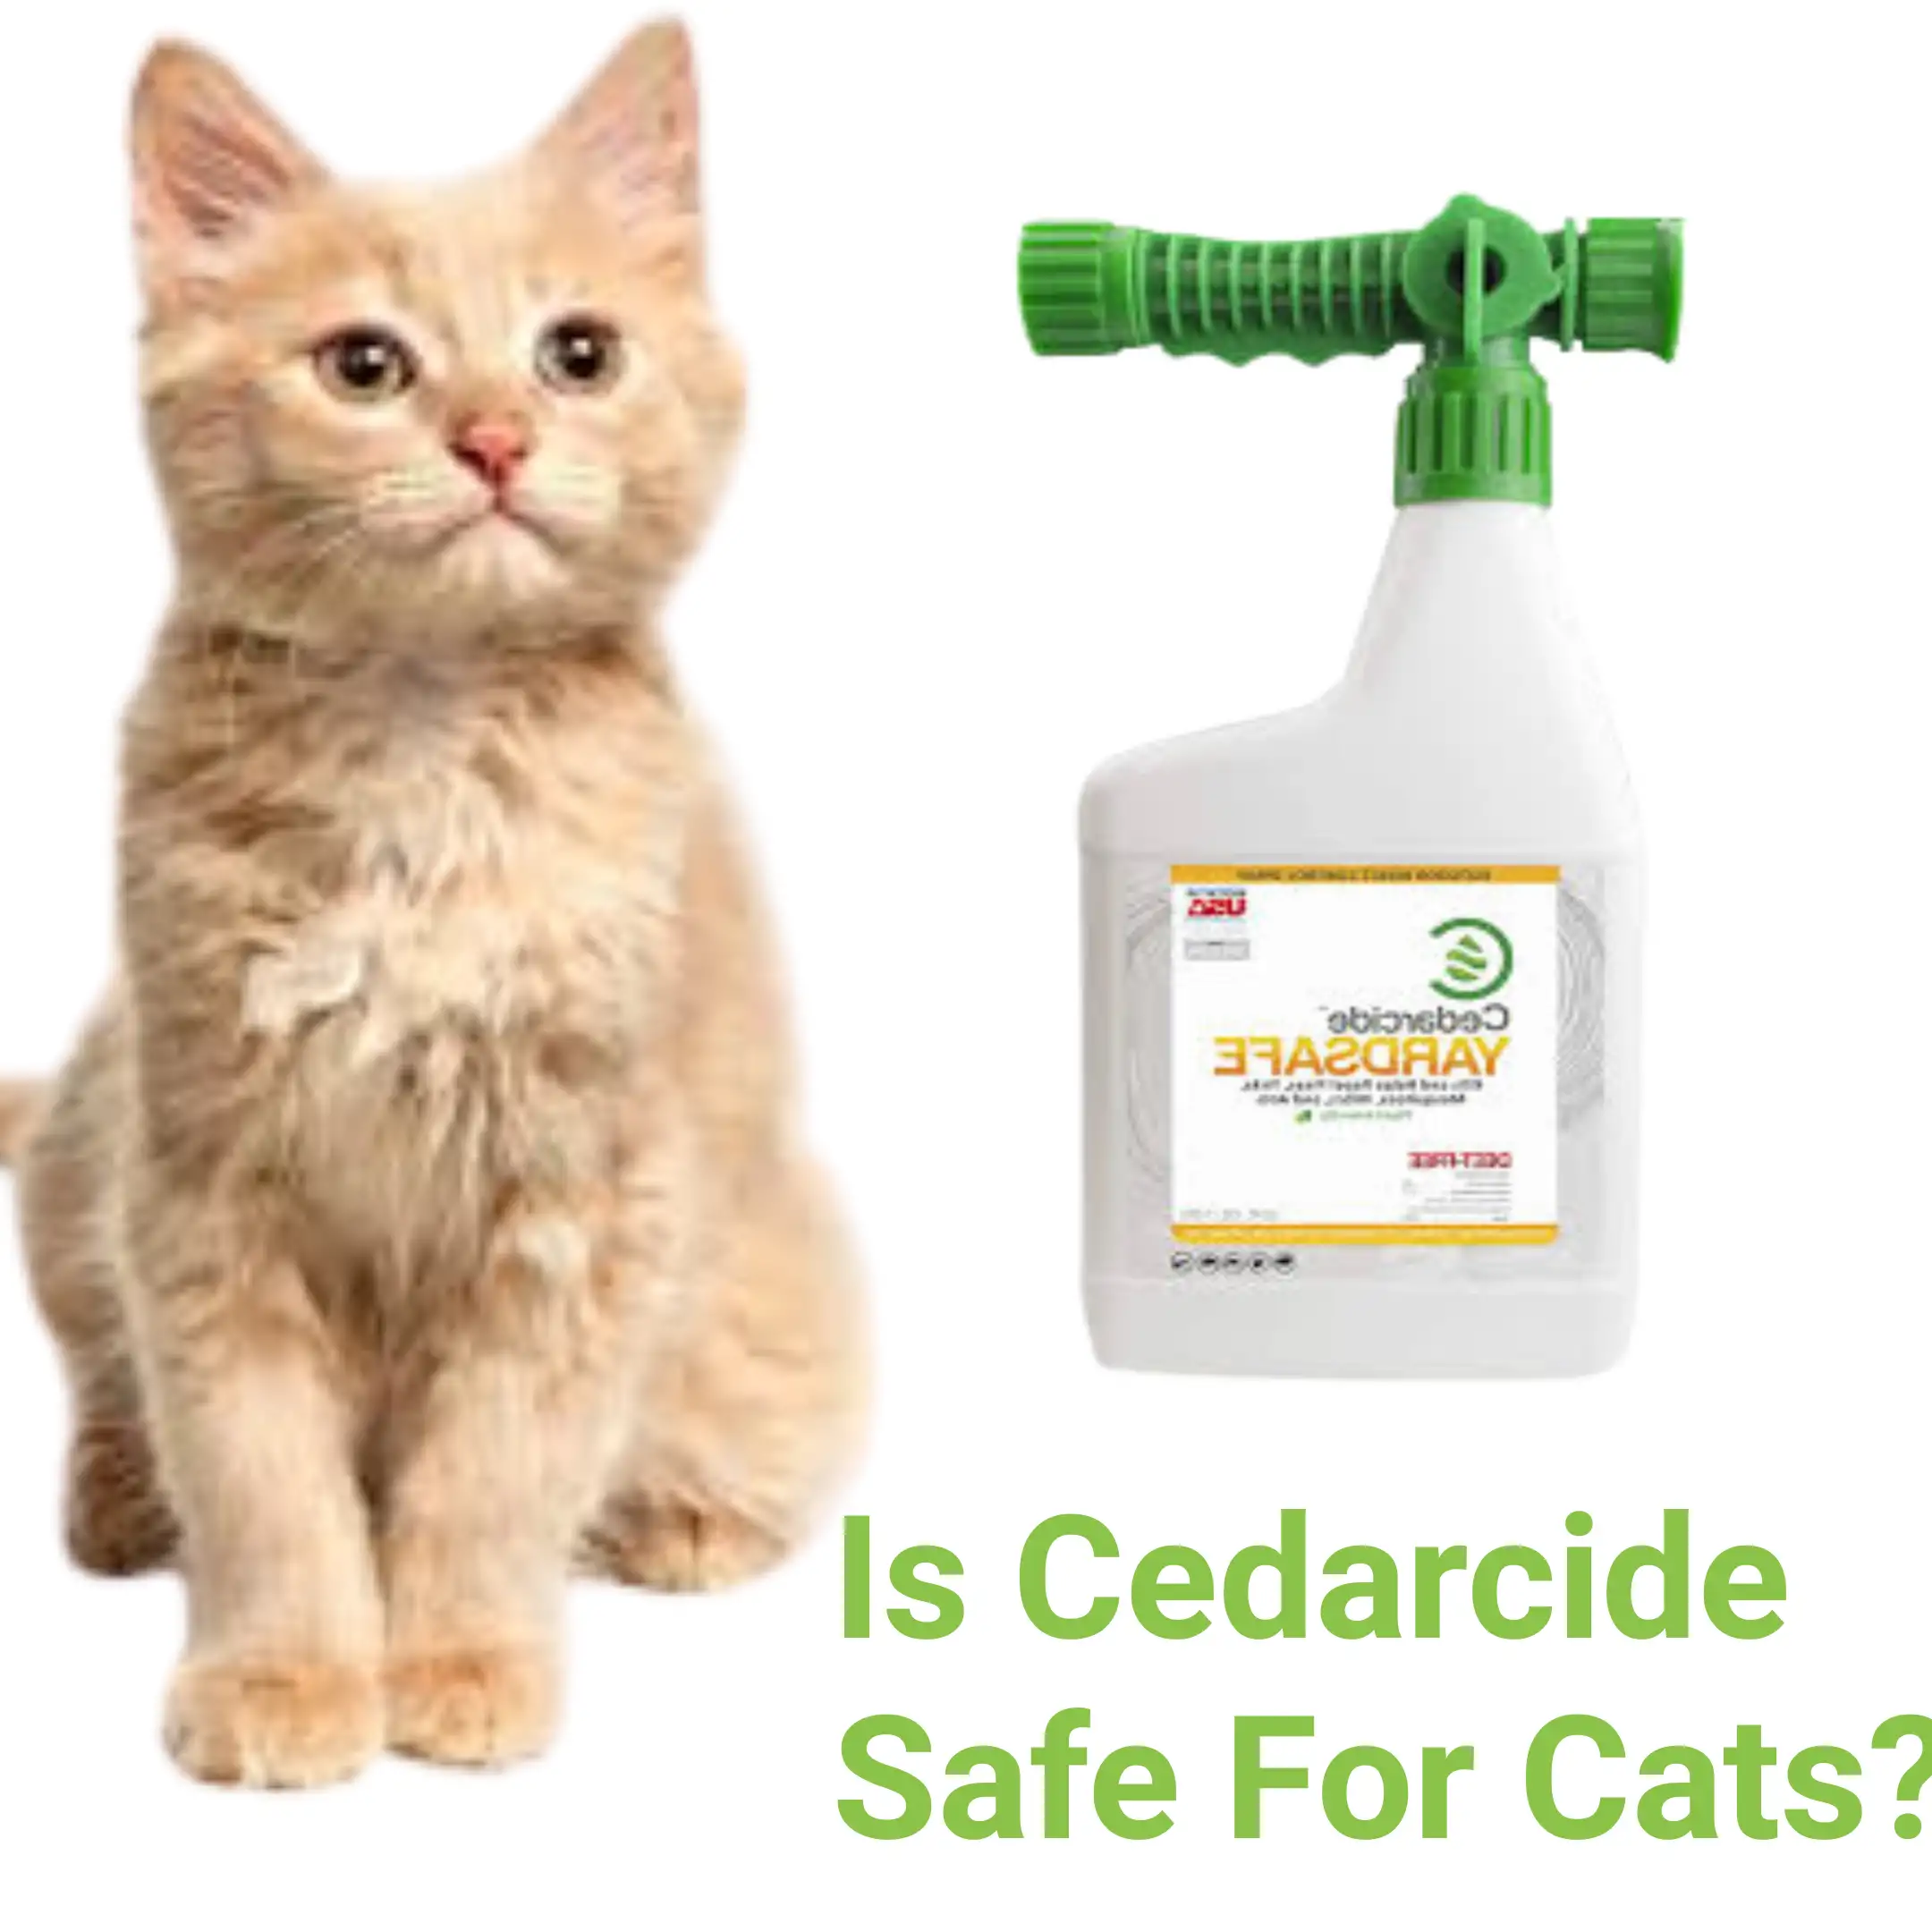 Is Cedarcide Safe For Cats?